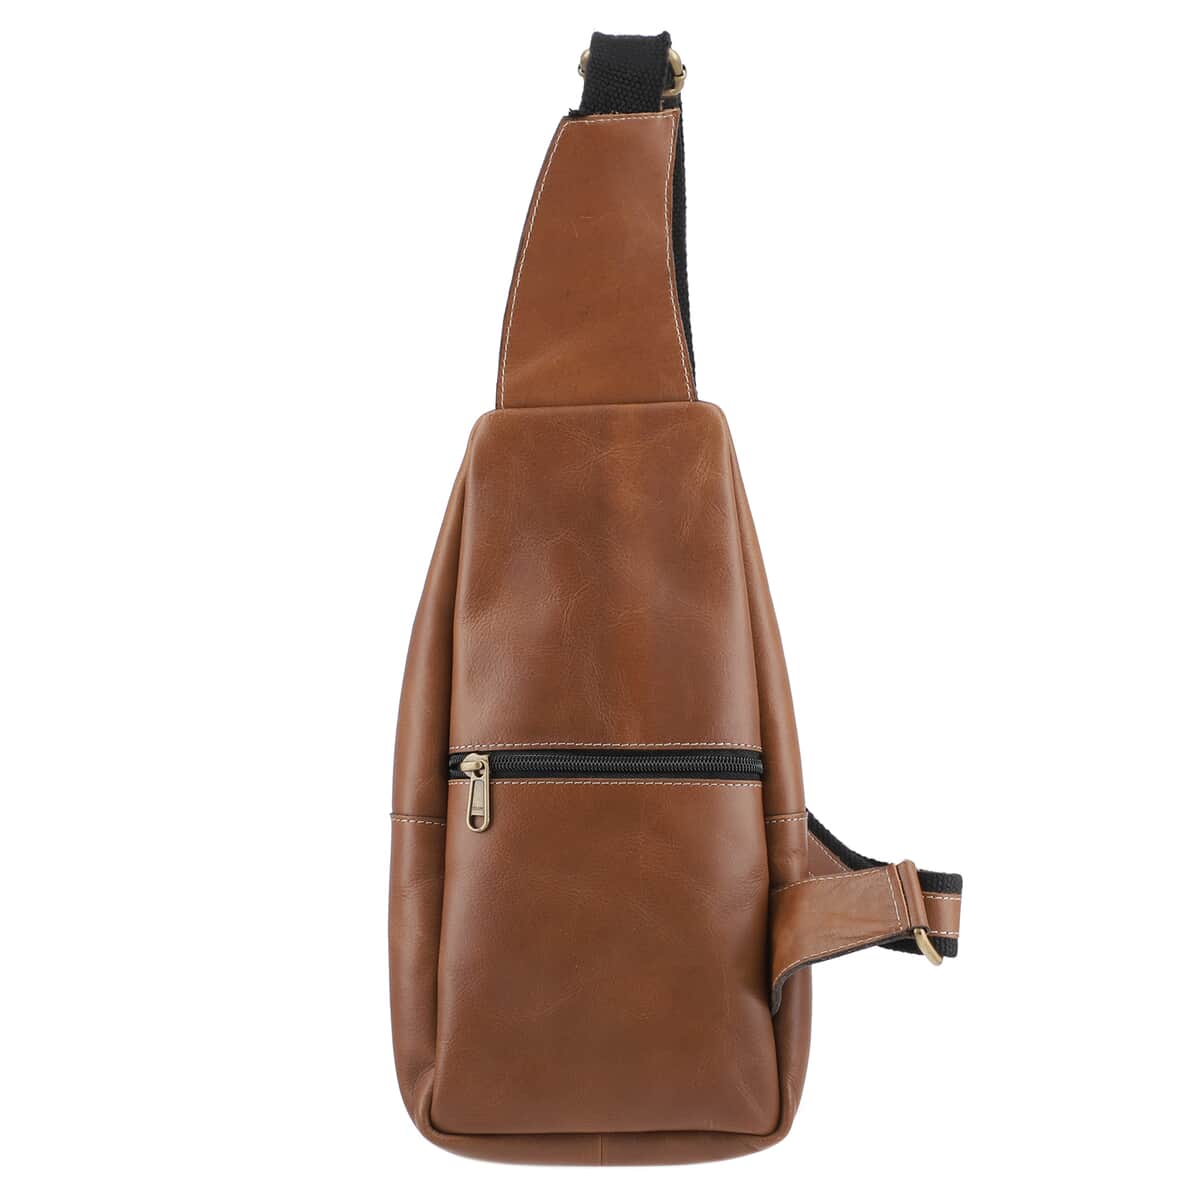 "100% Genuine Leather anti theft backpack bag Color: Beige Size: 5.9L x 3.2W x 8.66H inches " image number 3